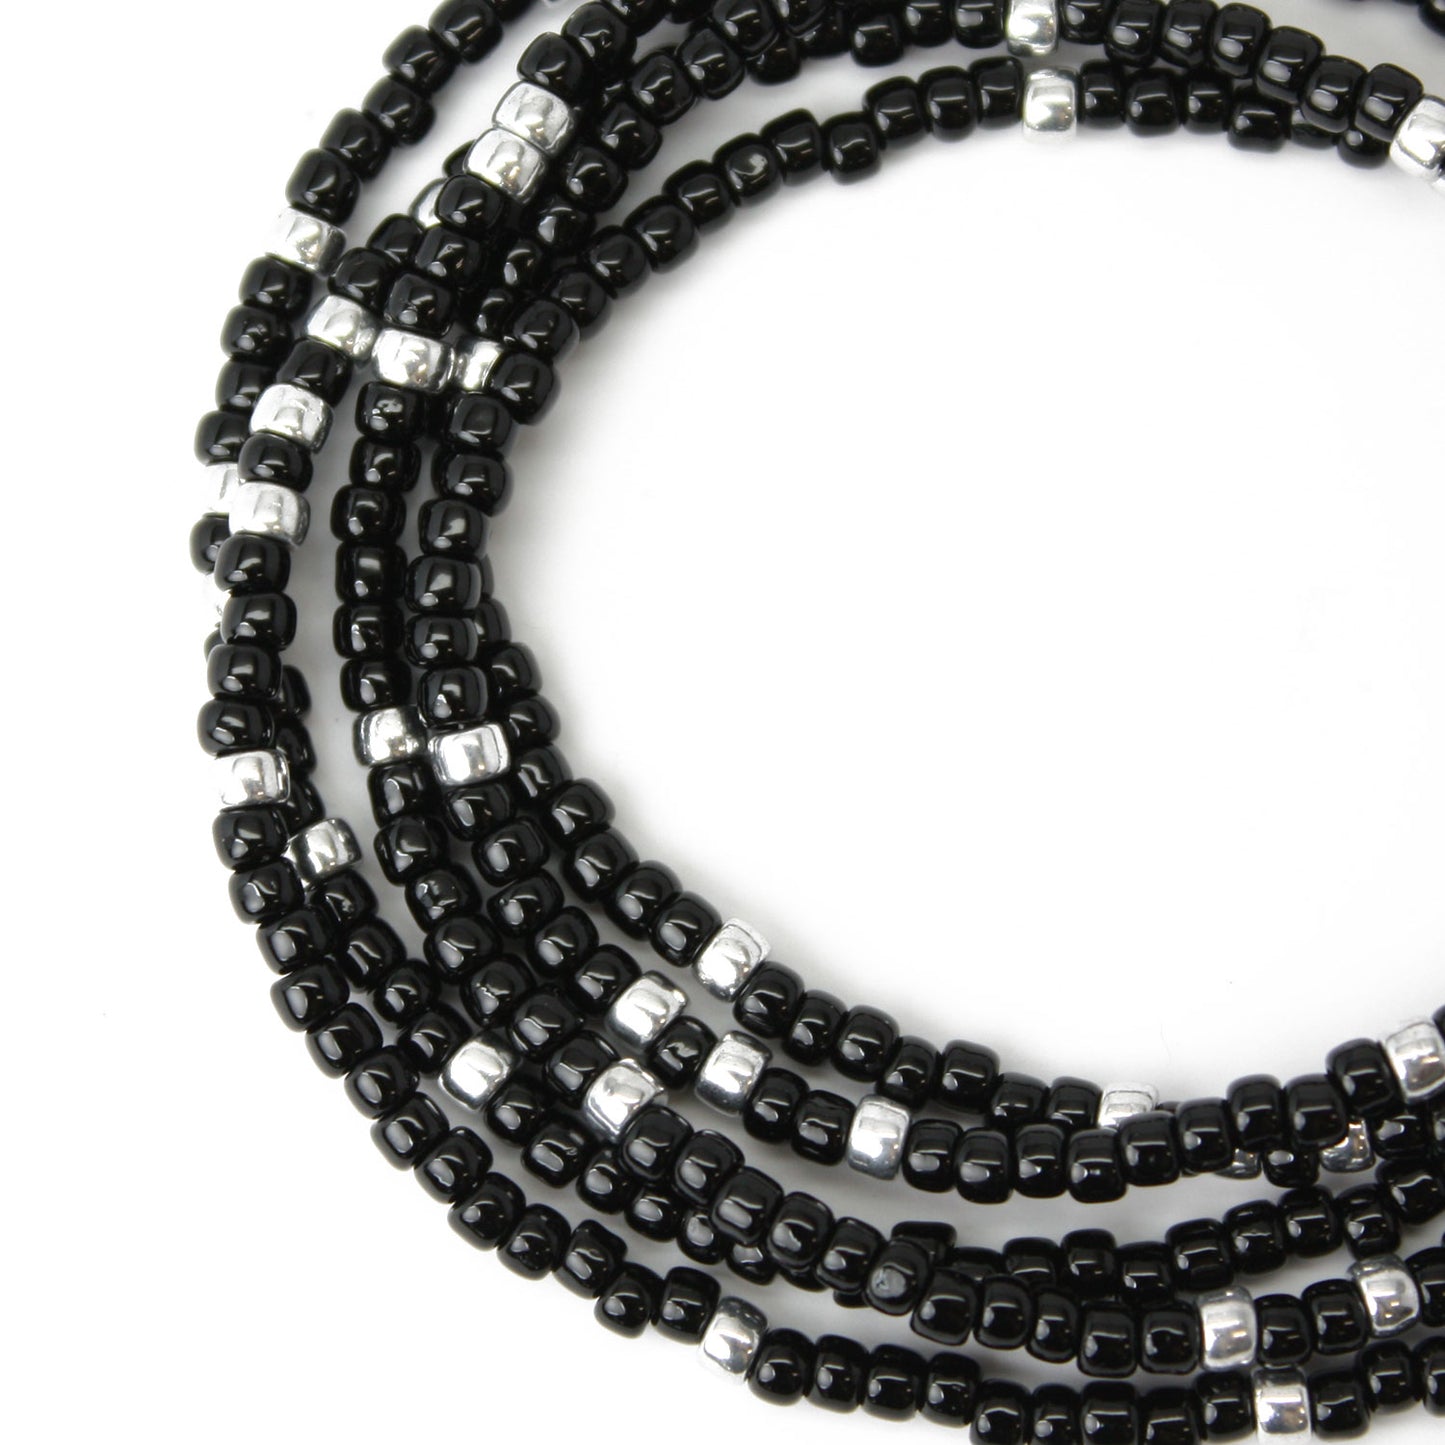 Black and Silver Seed Bead Necklace, Thin 2mm Single Strand Beaded Necklace 20